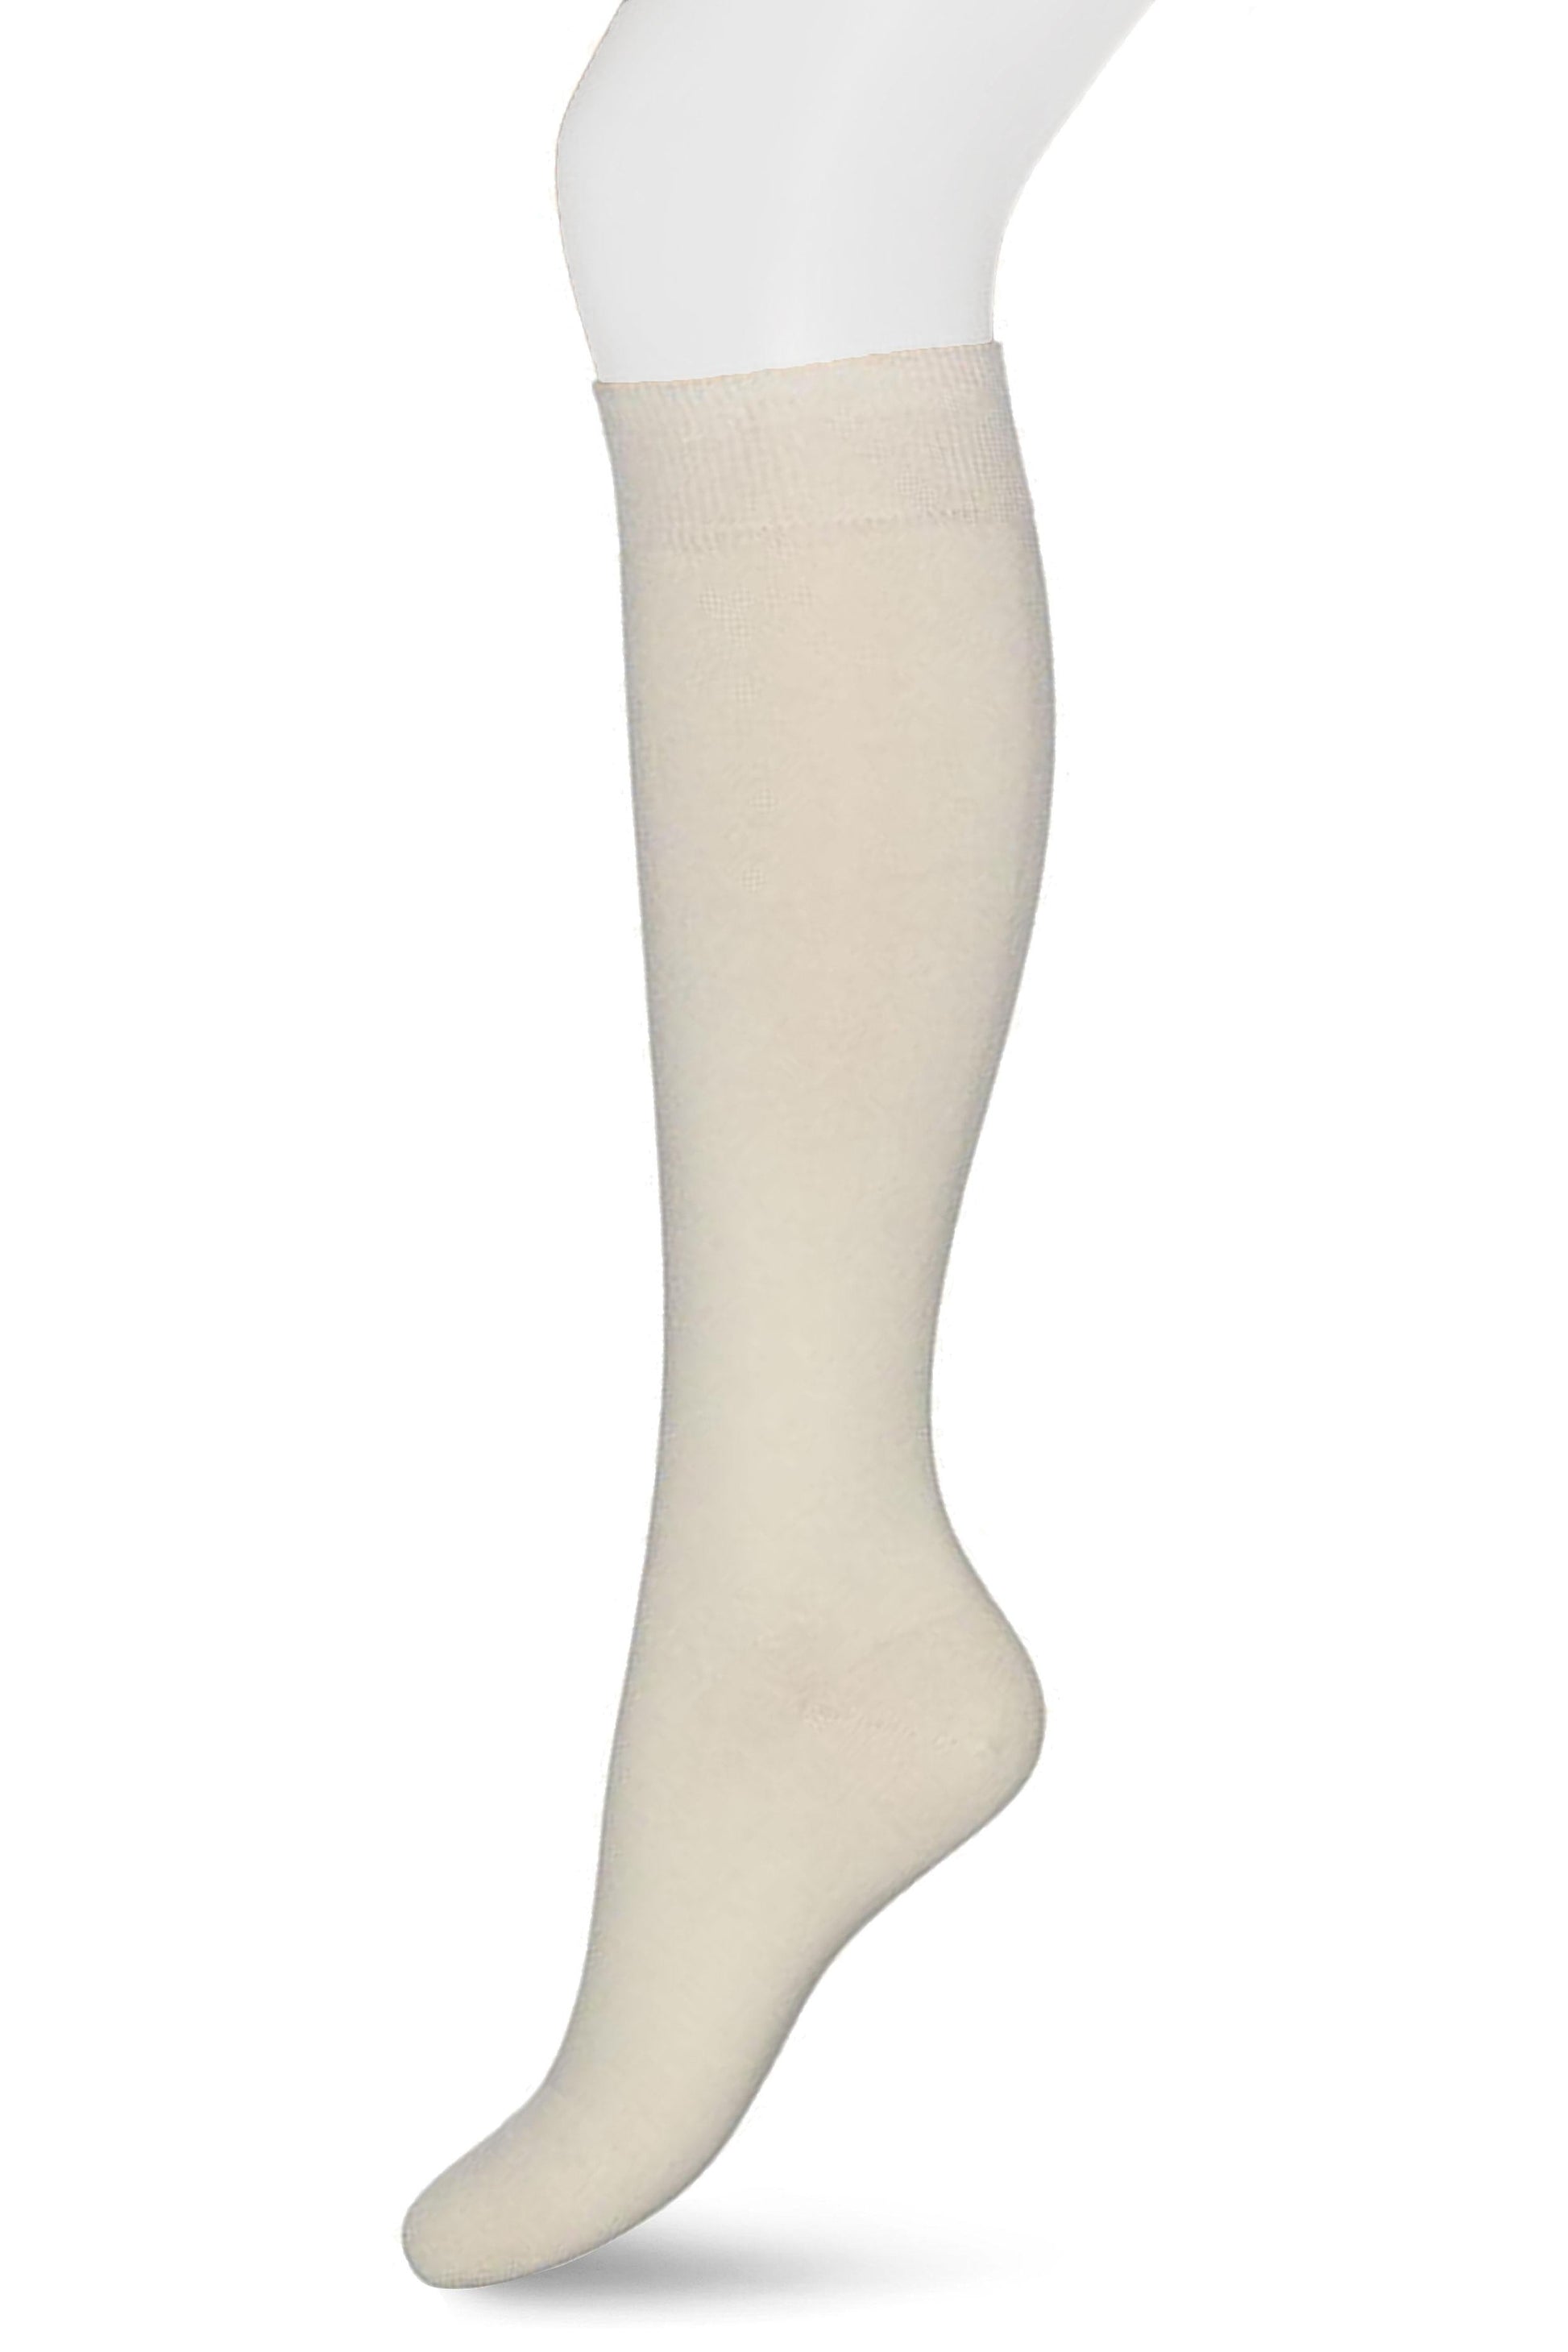 Bonnie Doon Wool/Cotton Knee-High R715011 - Ivory cream thermal knee socks perfect for cold Winters